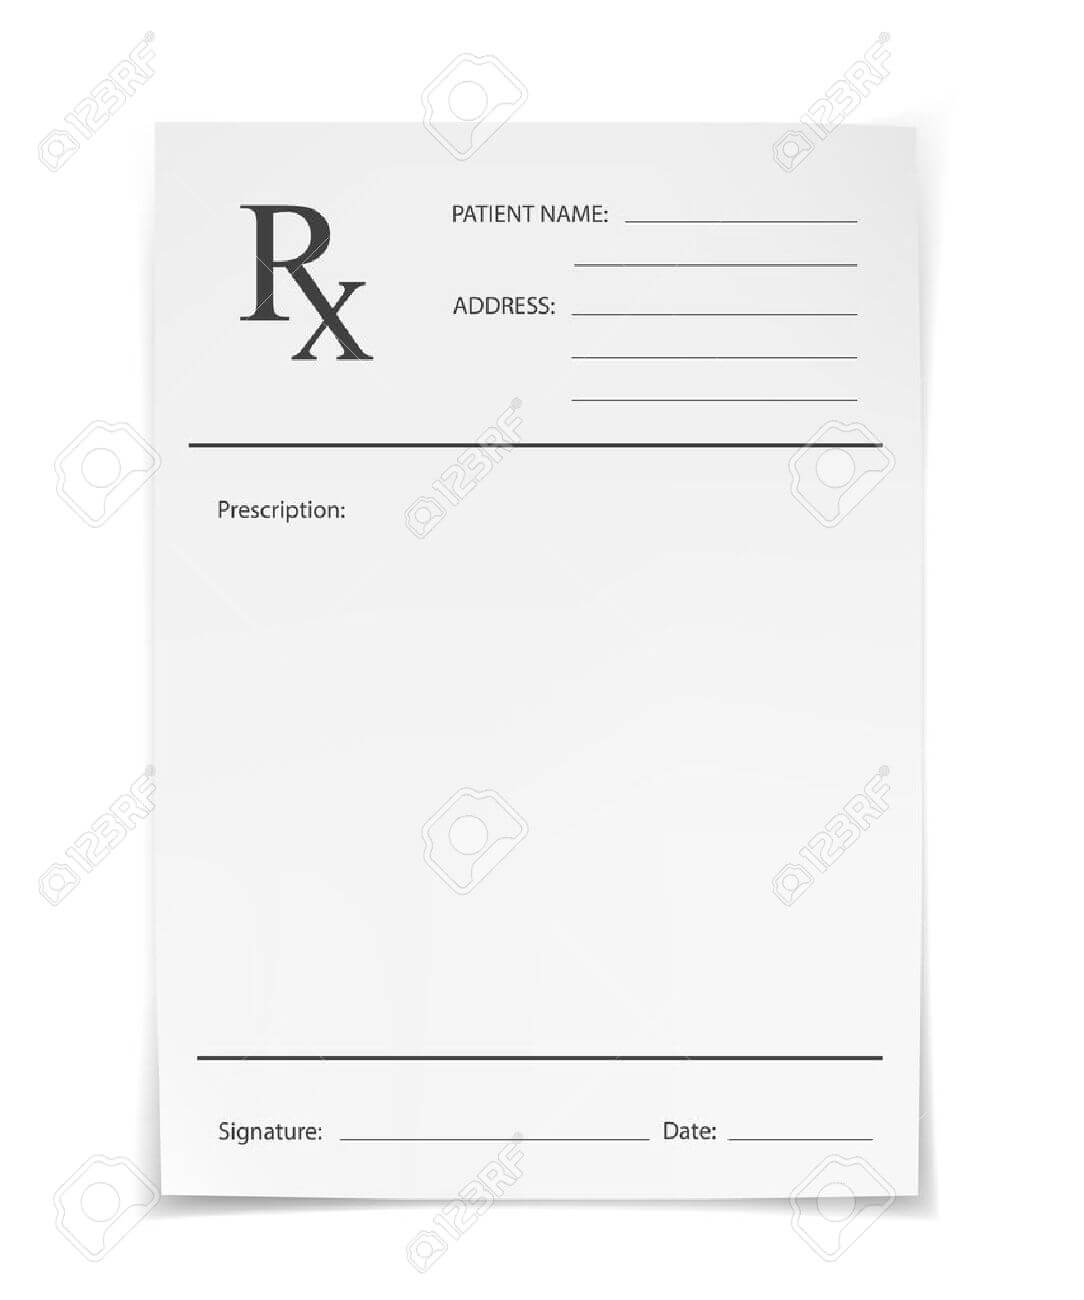 Blank Rx Prescription Form Isolated On White Background Pertaining To Blank Prescription Form Template